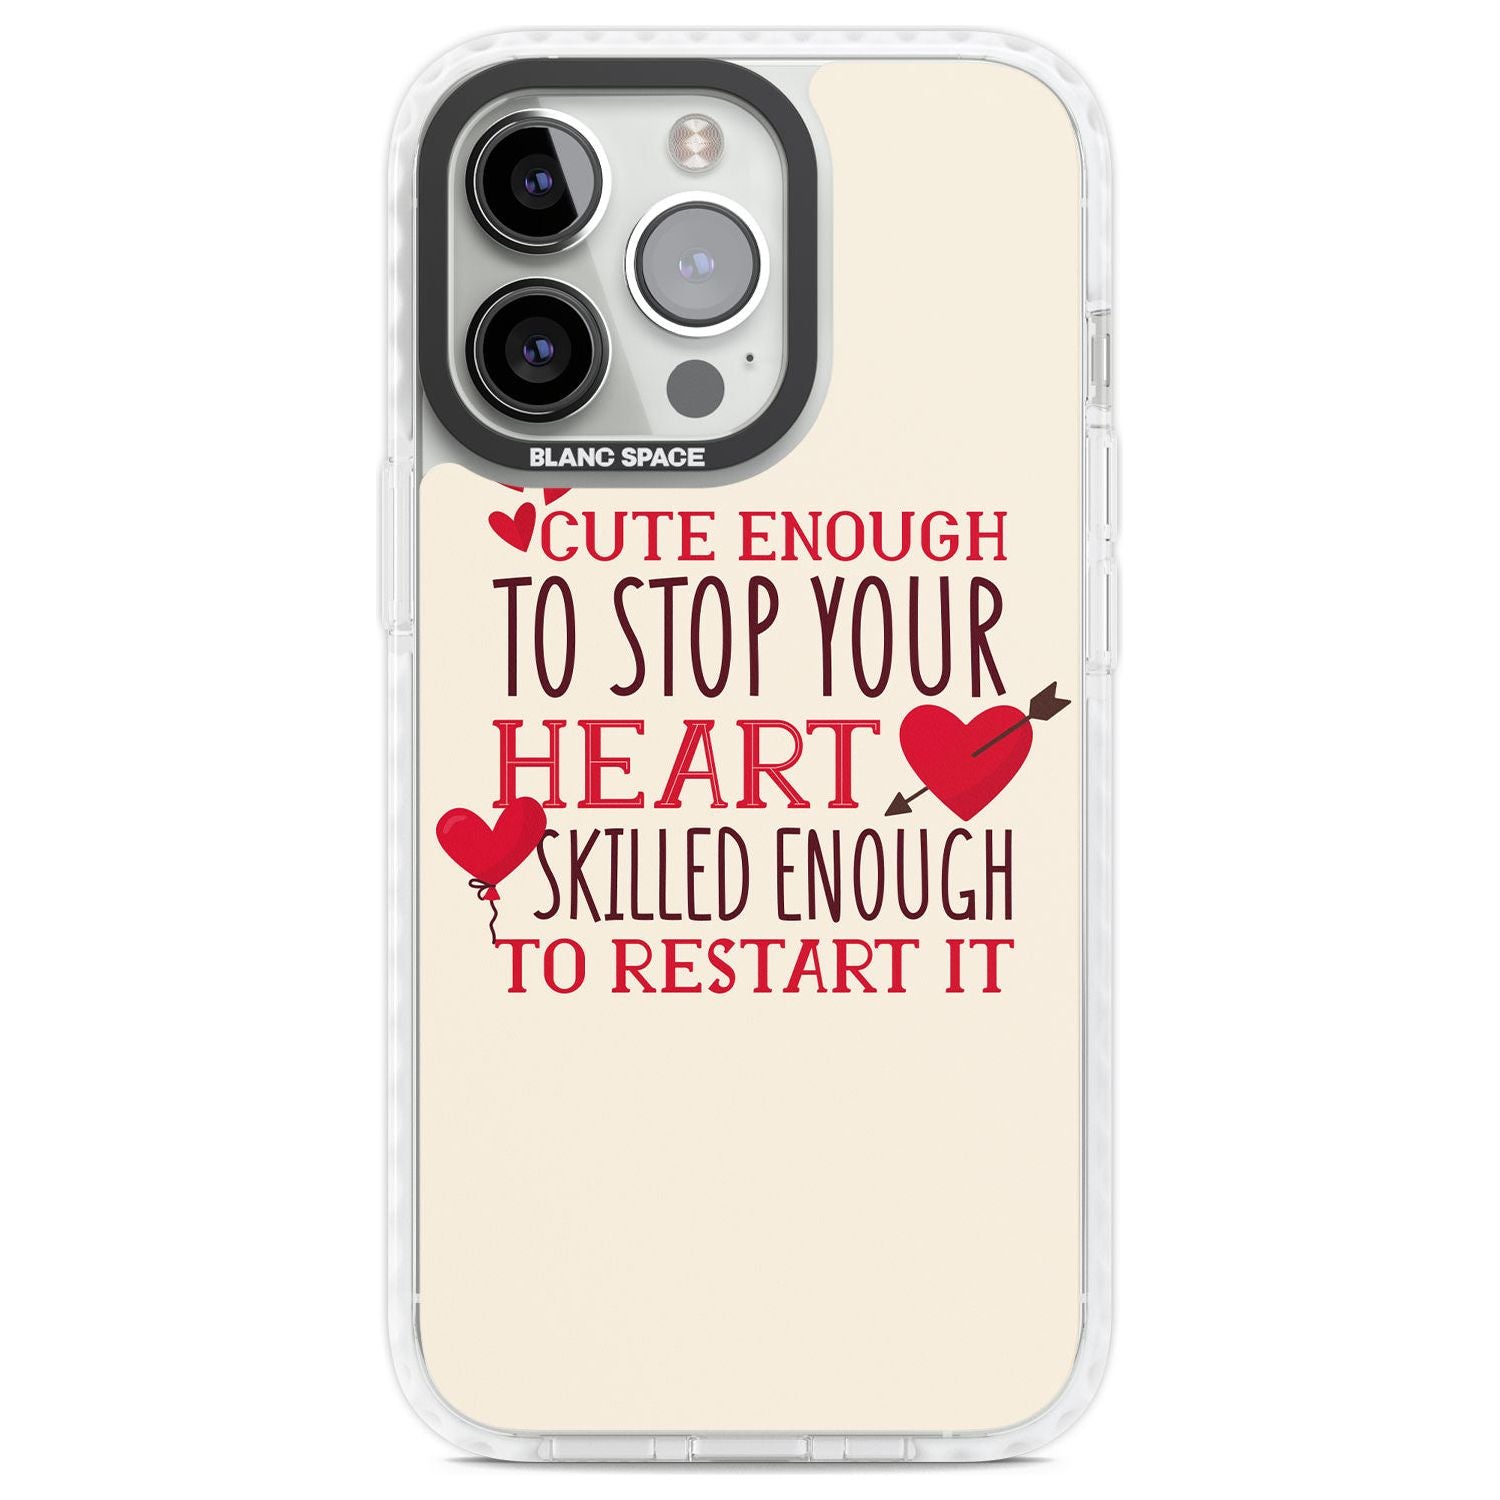 Medical Design Cute Enough to Stop Your Heart Phone Case iPhone 13 Pro / Impact Case,iPhone 14 Pro / Impact Case,iPhone 15 Pro Max / Impact Case,iPhone 15 Pro / Impact Case Blanc Space